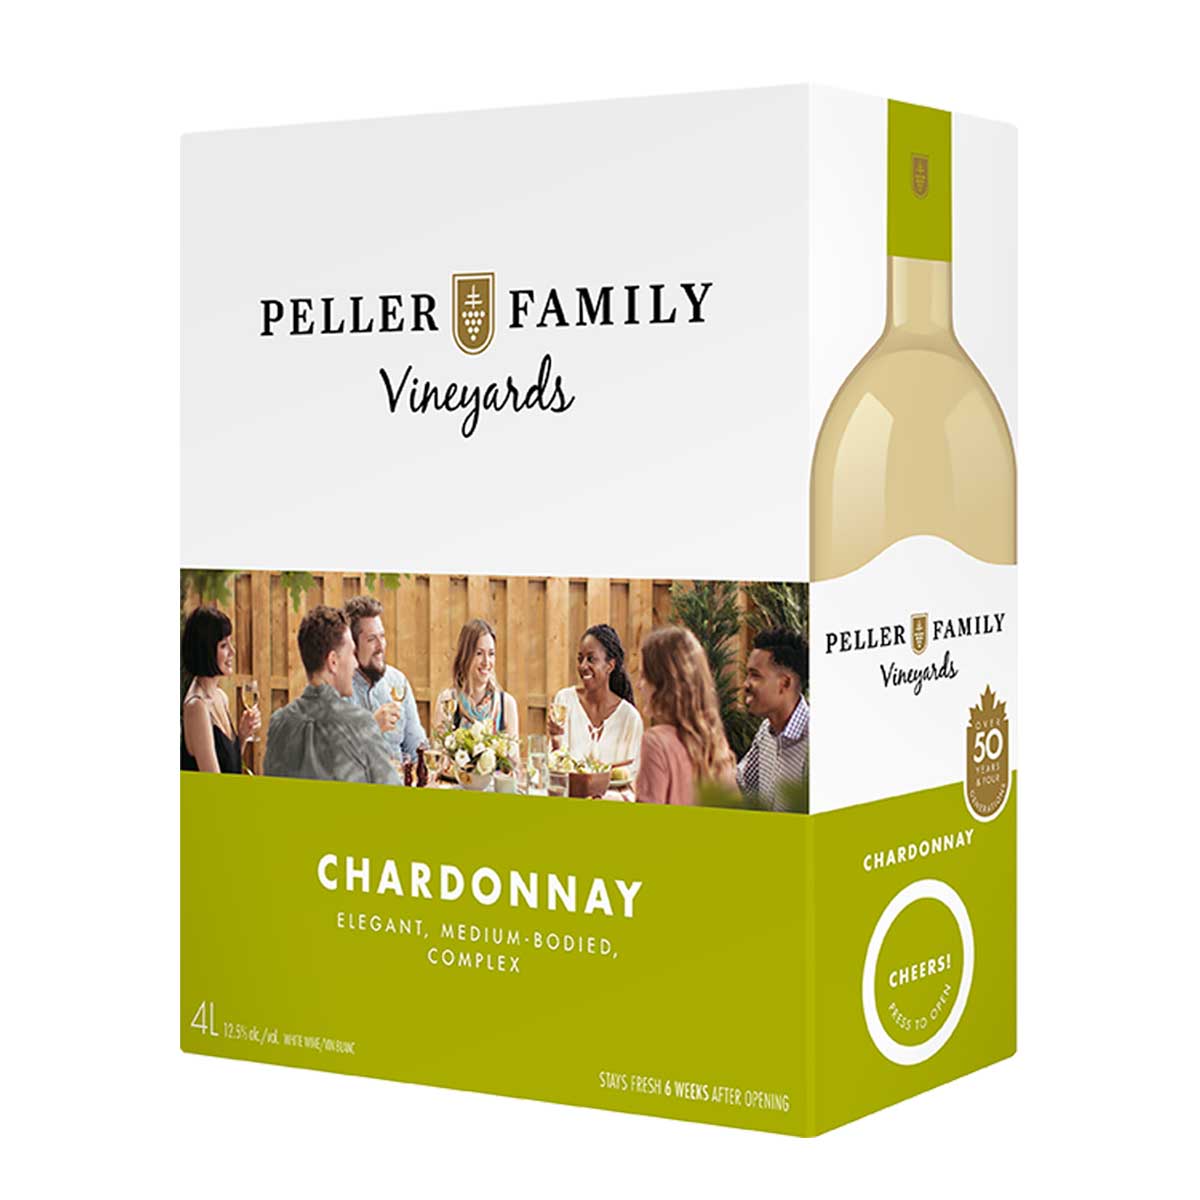 TAG Liquor Stores Delivery - Peller Family Vineyards Chardonnay 4L Box